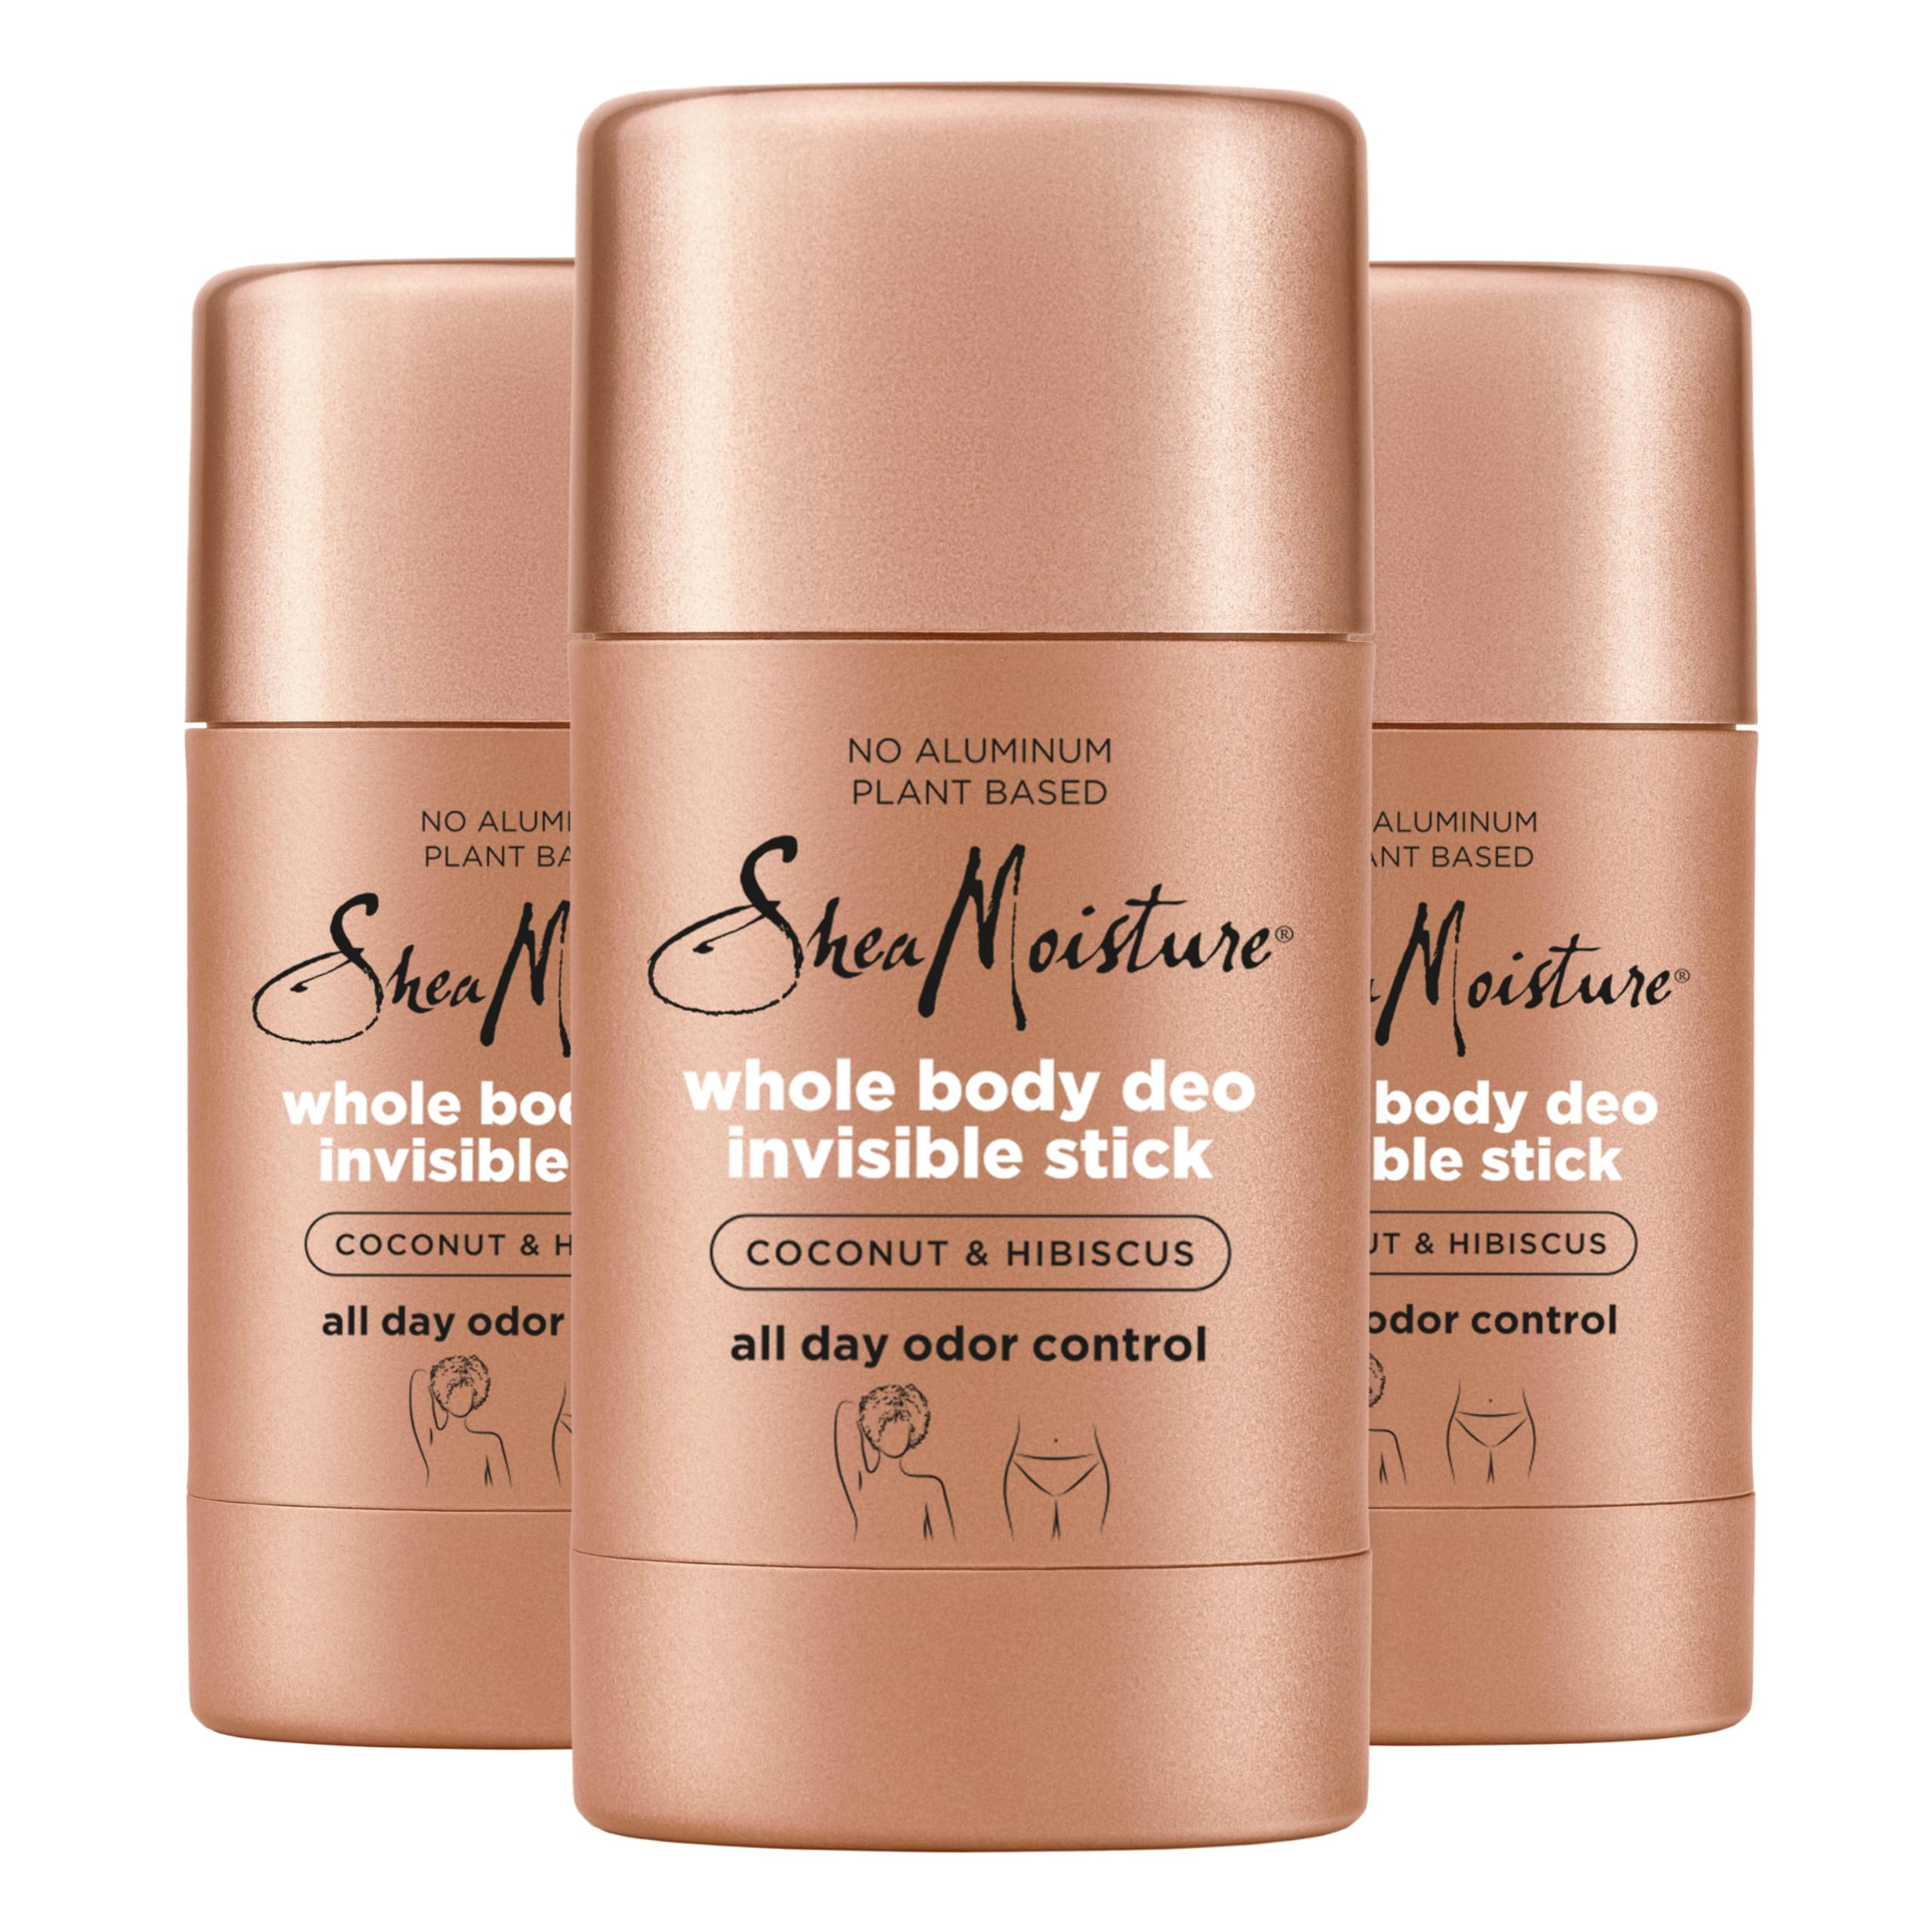 SheaMoisture Invisible Deo Stick Coconut & Hibiscus 3count Whole Body Plant Based, No Aluminum 2.6 oz for $9.97